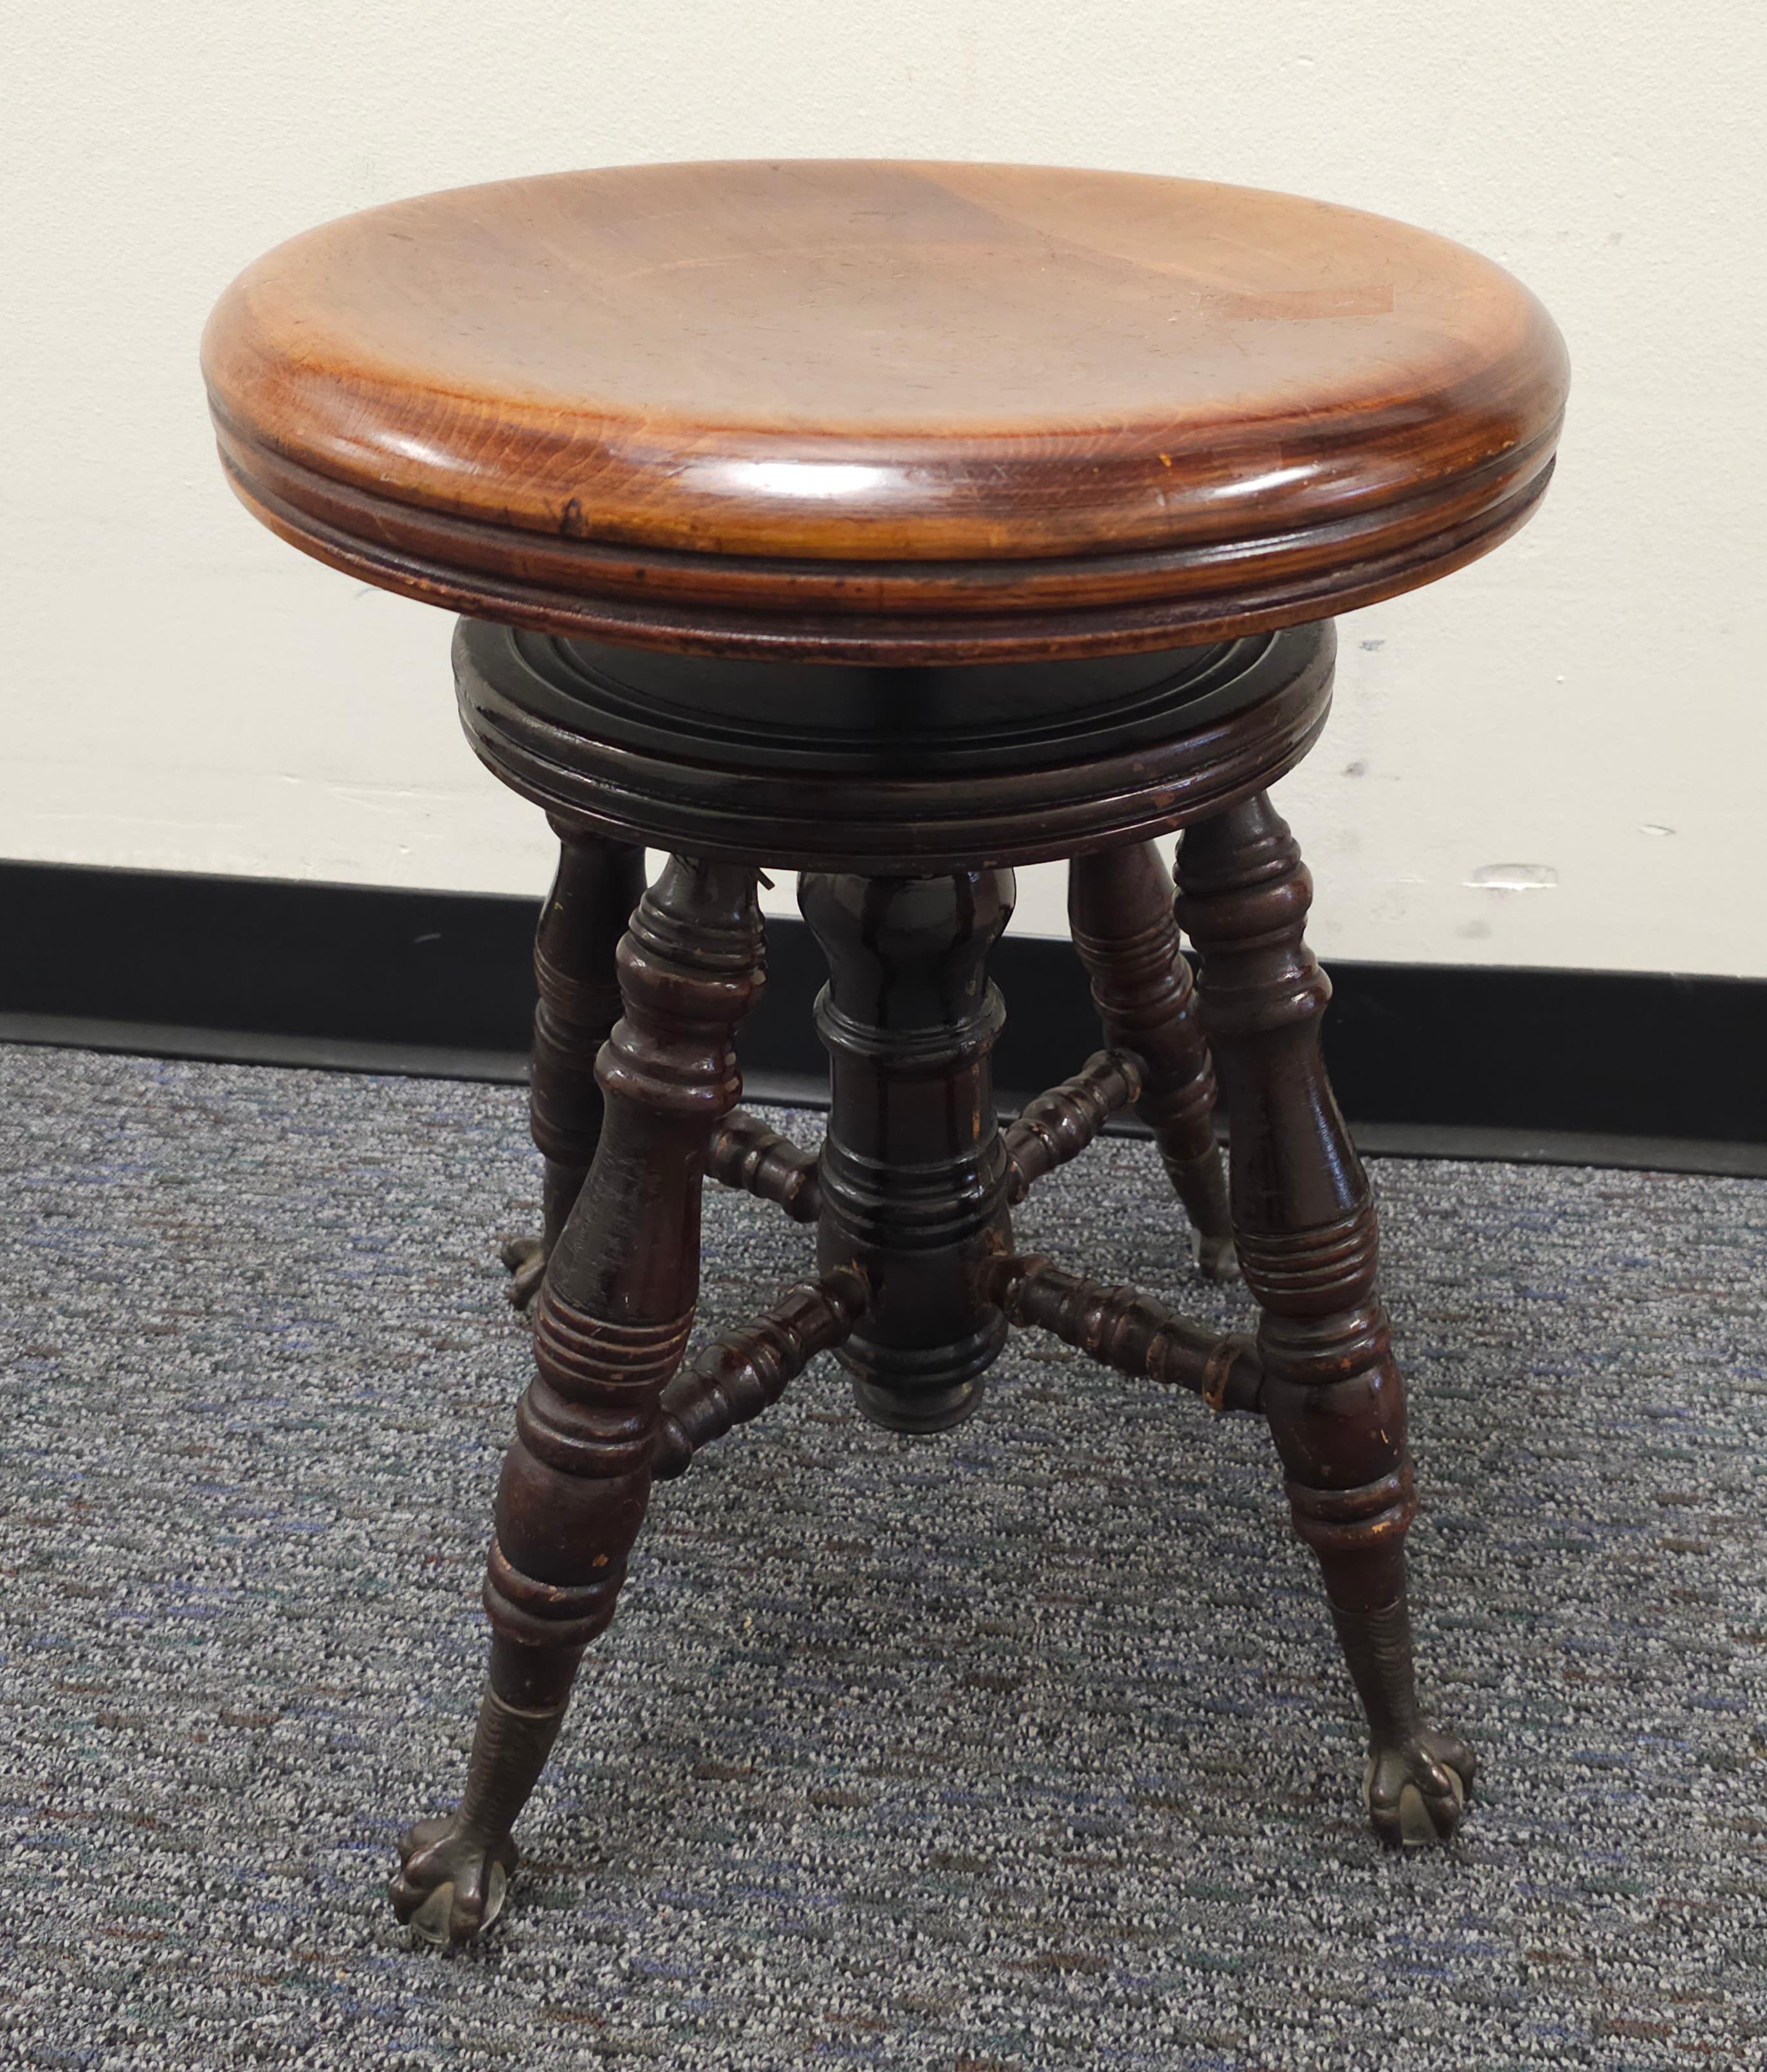 19th Century Mid-19th C. Charles Parker Mahogany and Iron Piano Stool with Ball Claw Feet For Sale